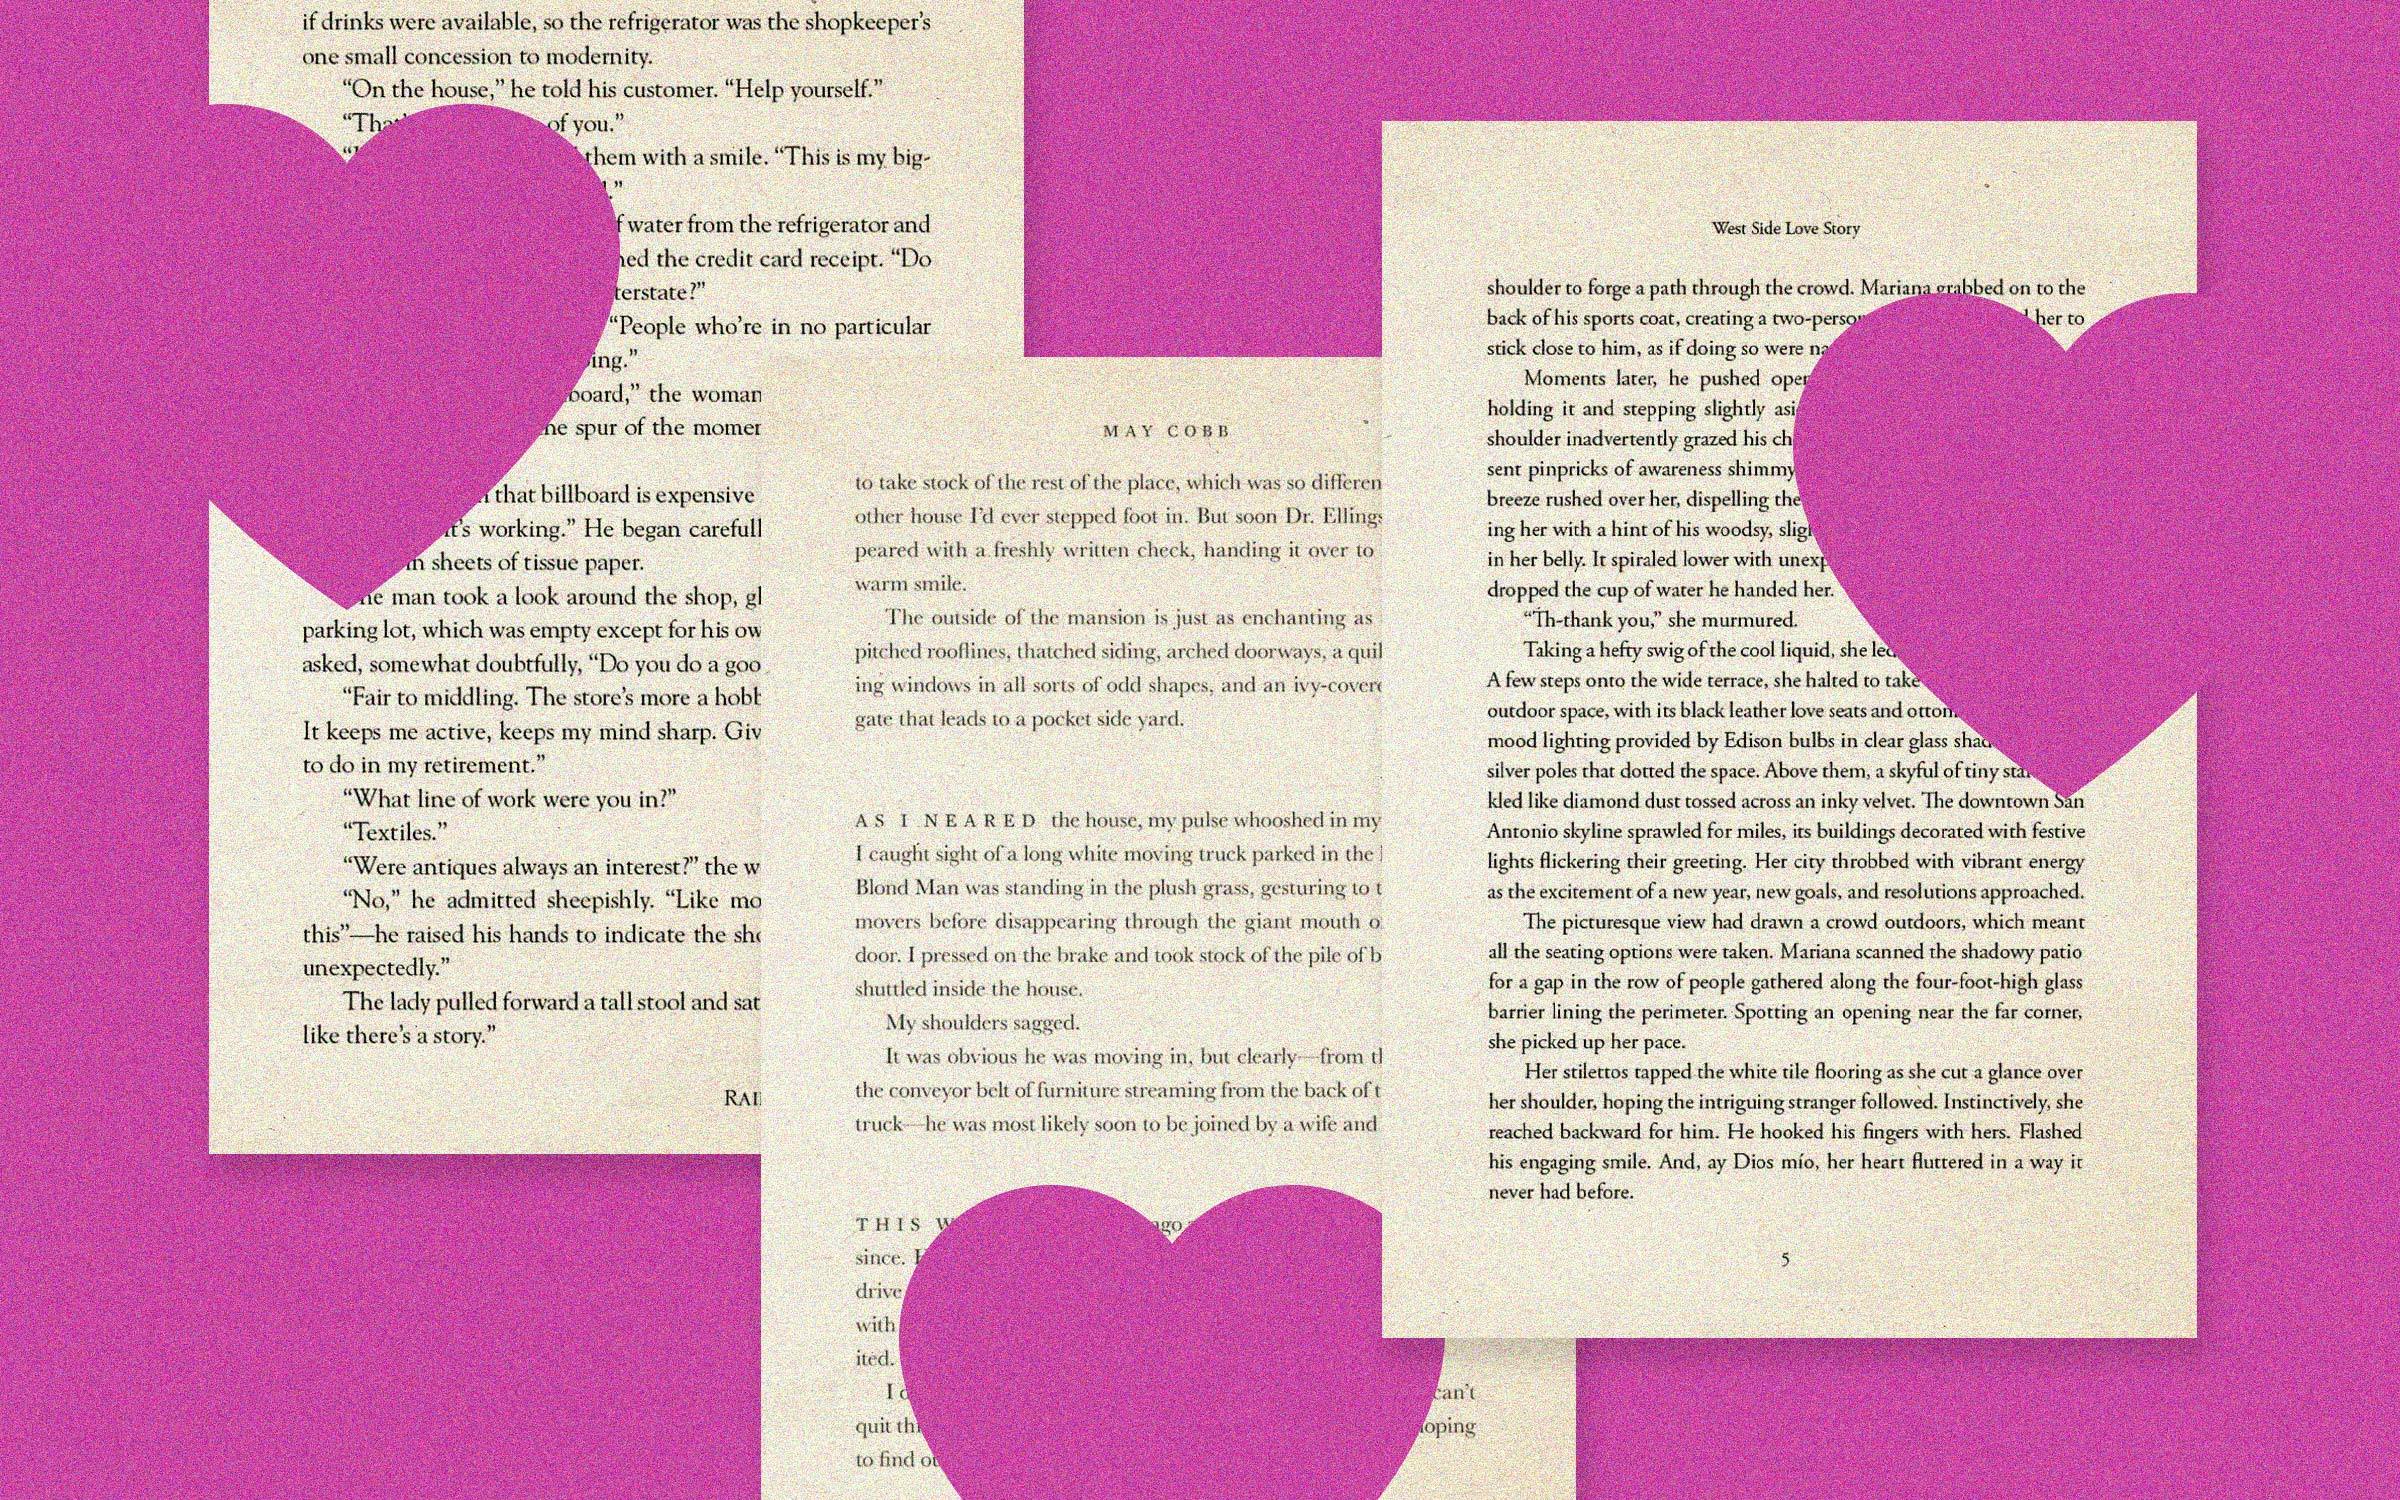 The Best Texas Romance Novels for Valentine's Day